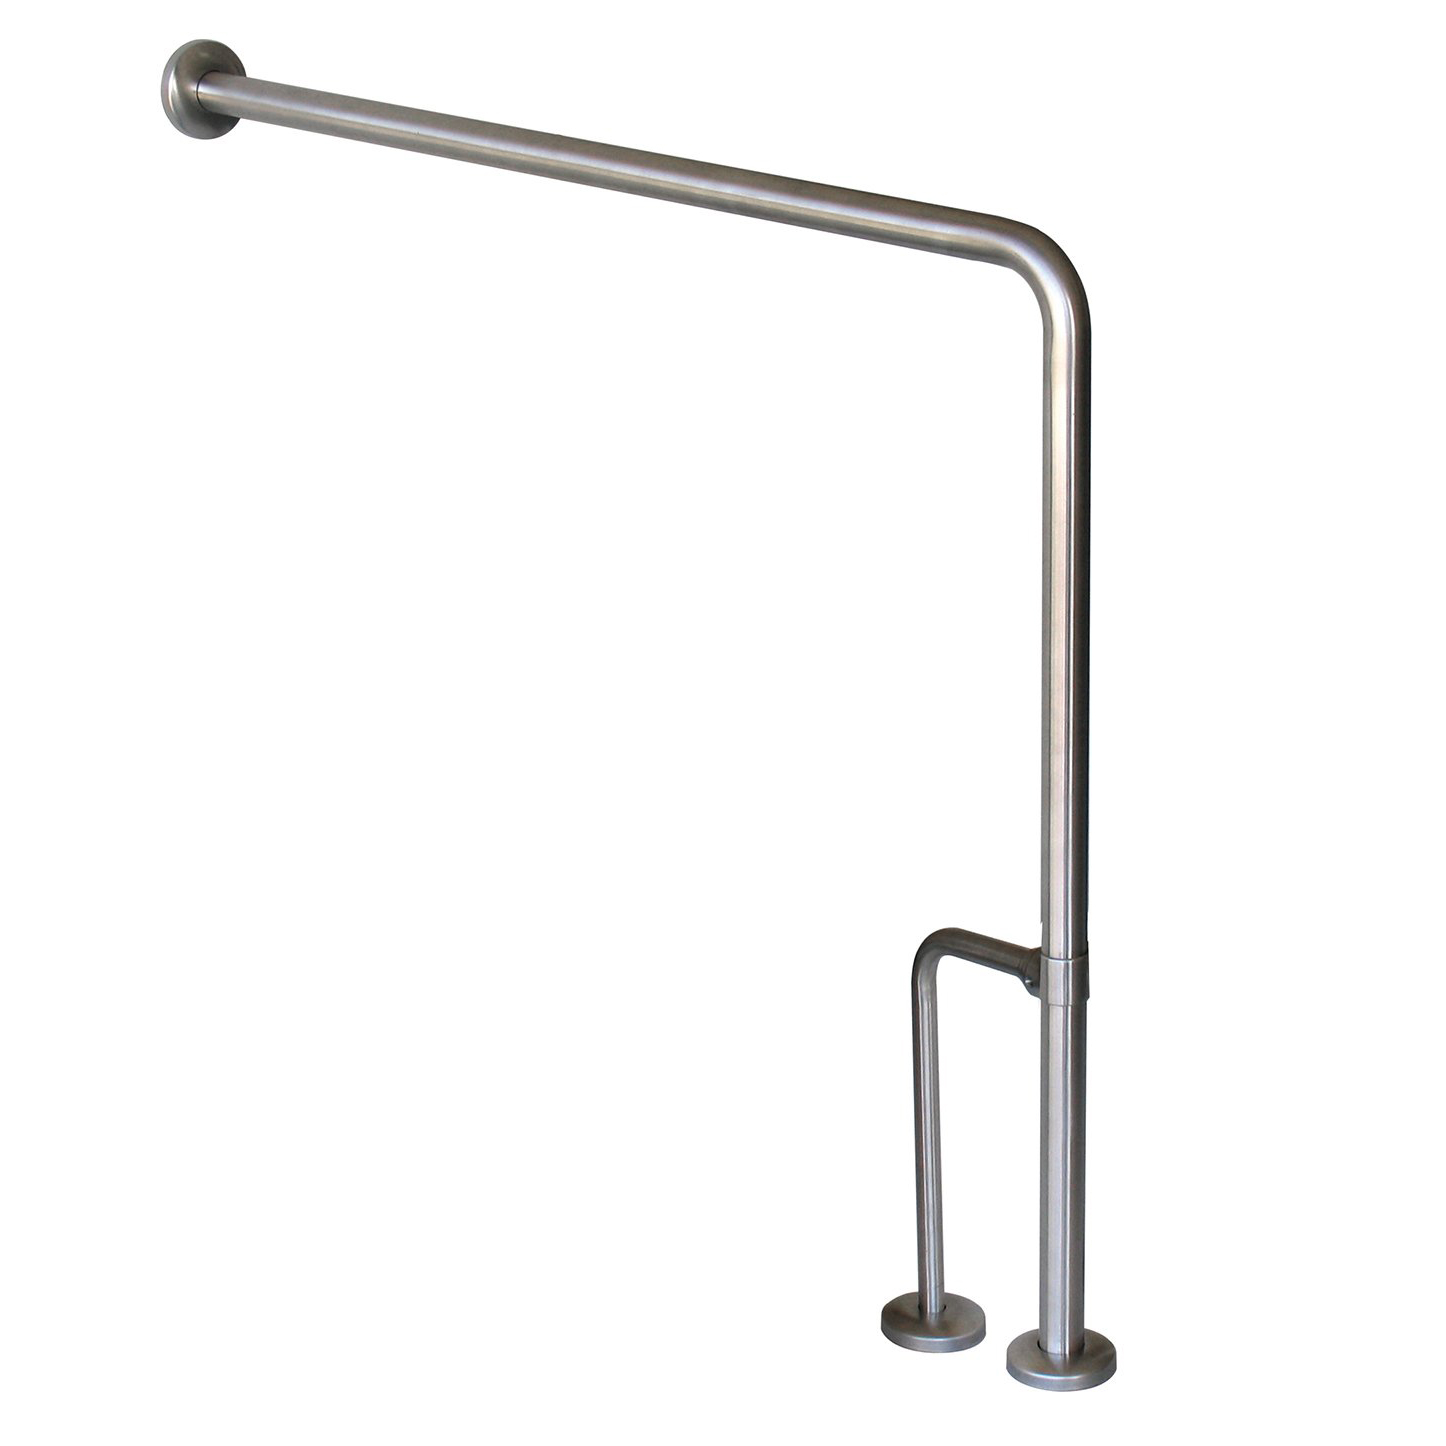 Type 112 - 32mm WC Stainless Steel Grab Rail